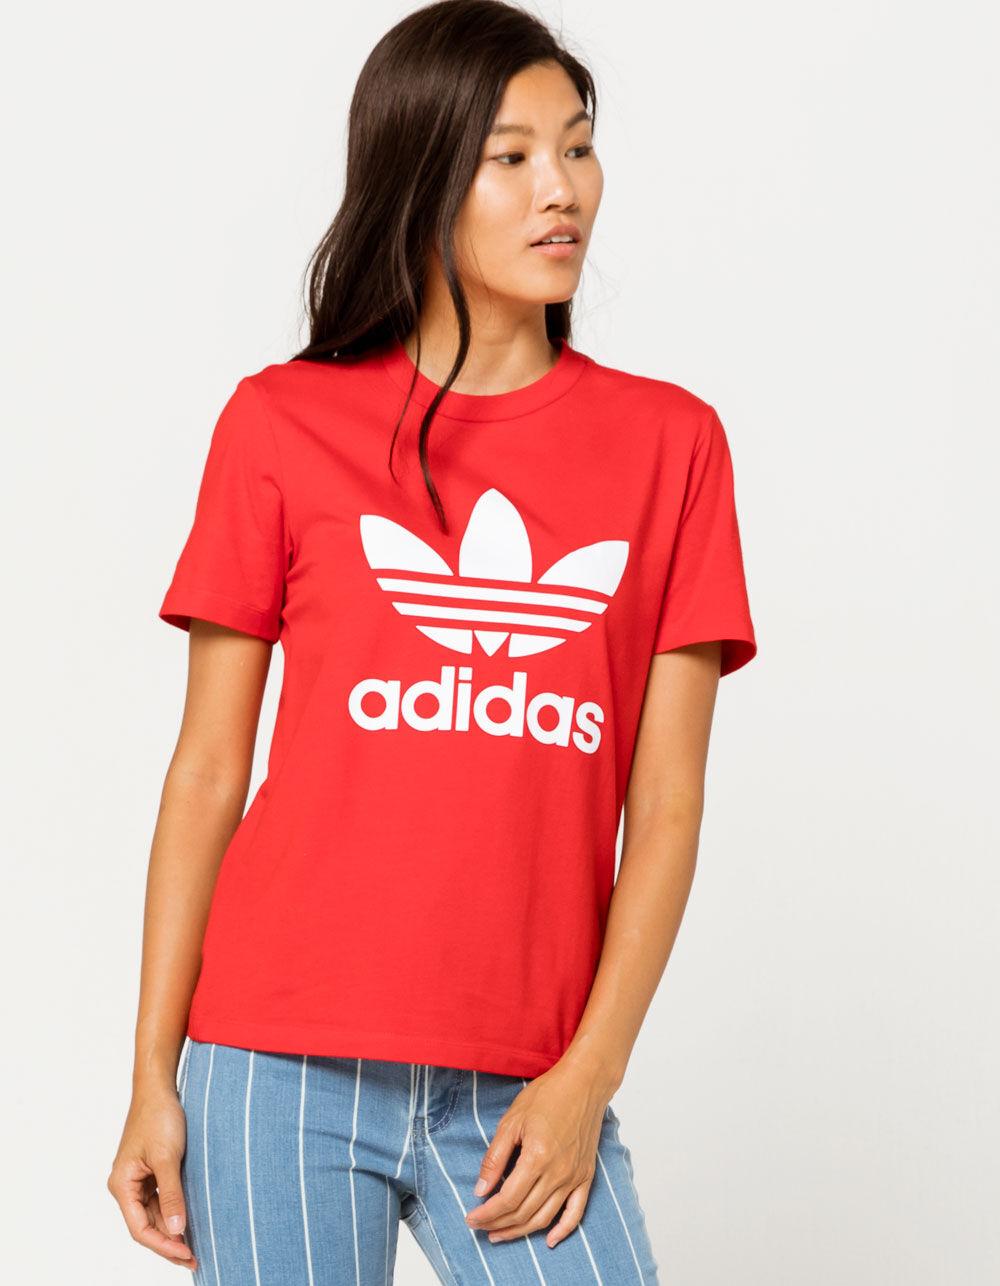 adidas Cotton Trefoil Red Womens Tee - Lyst